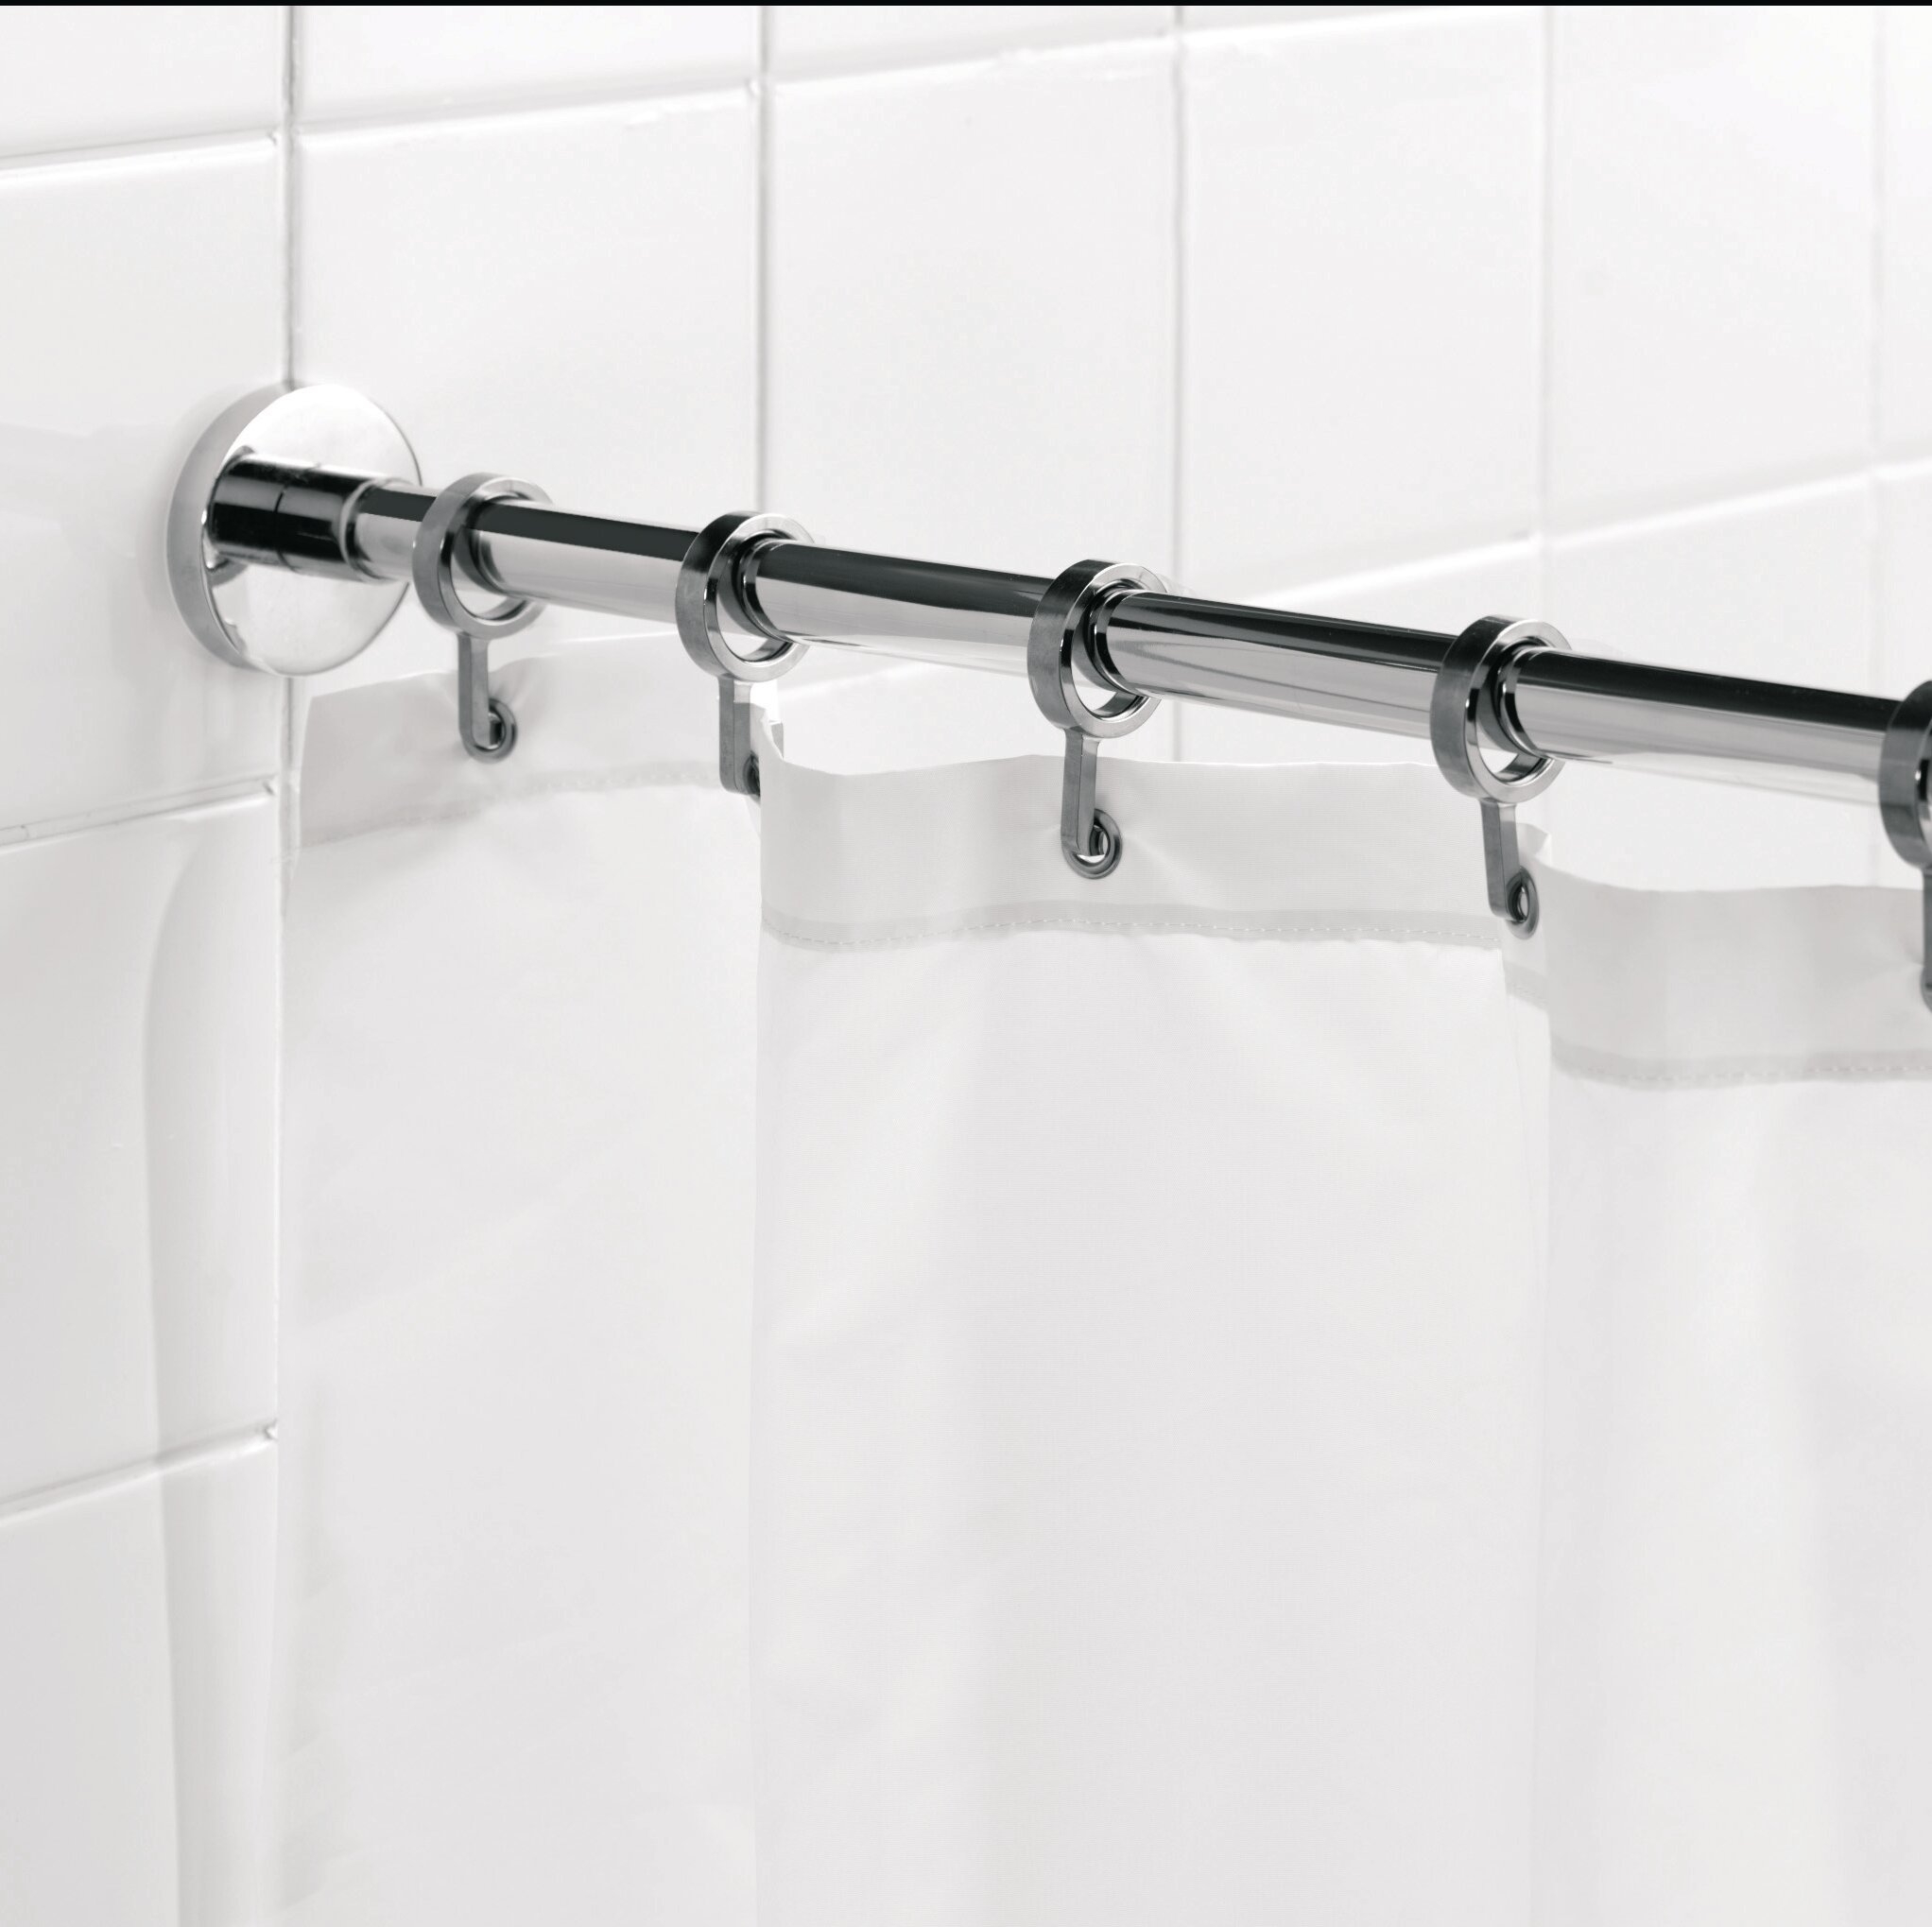 Shower curtain rod flanges